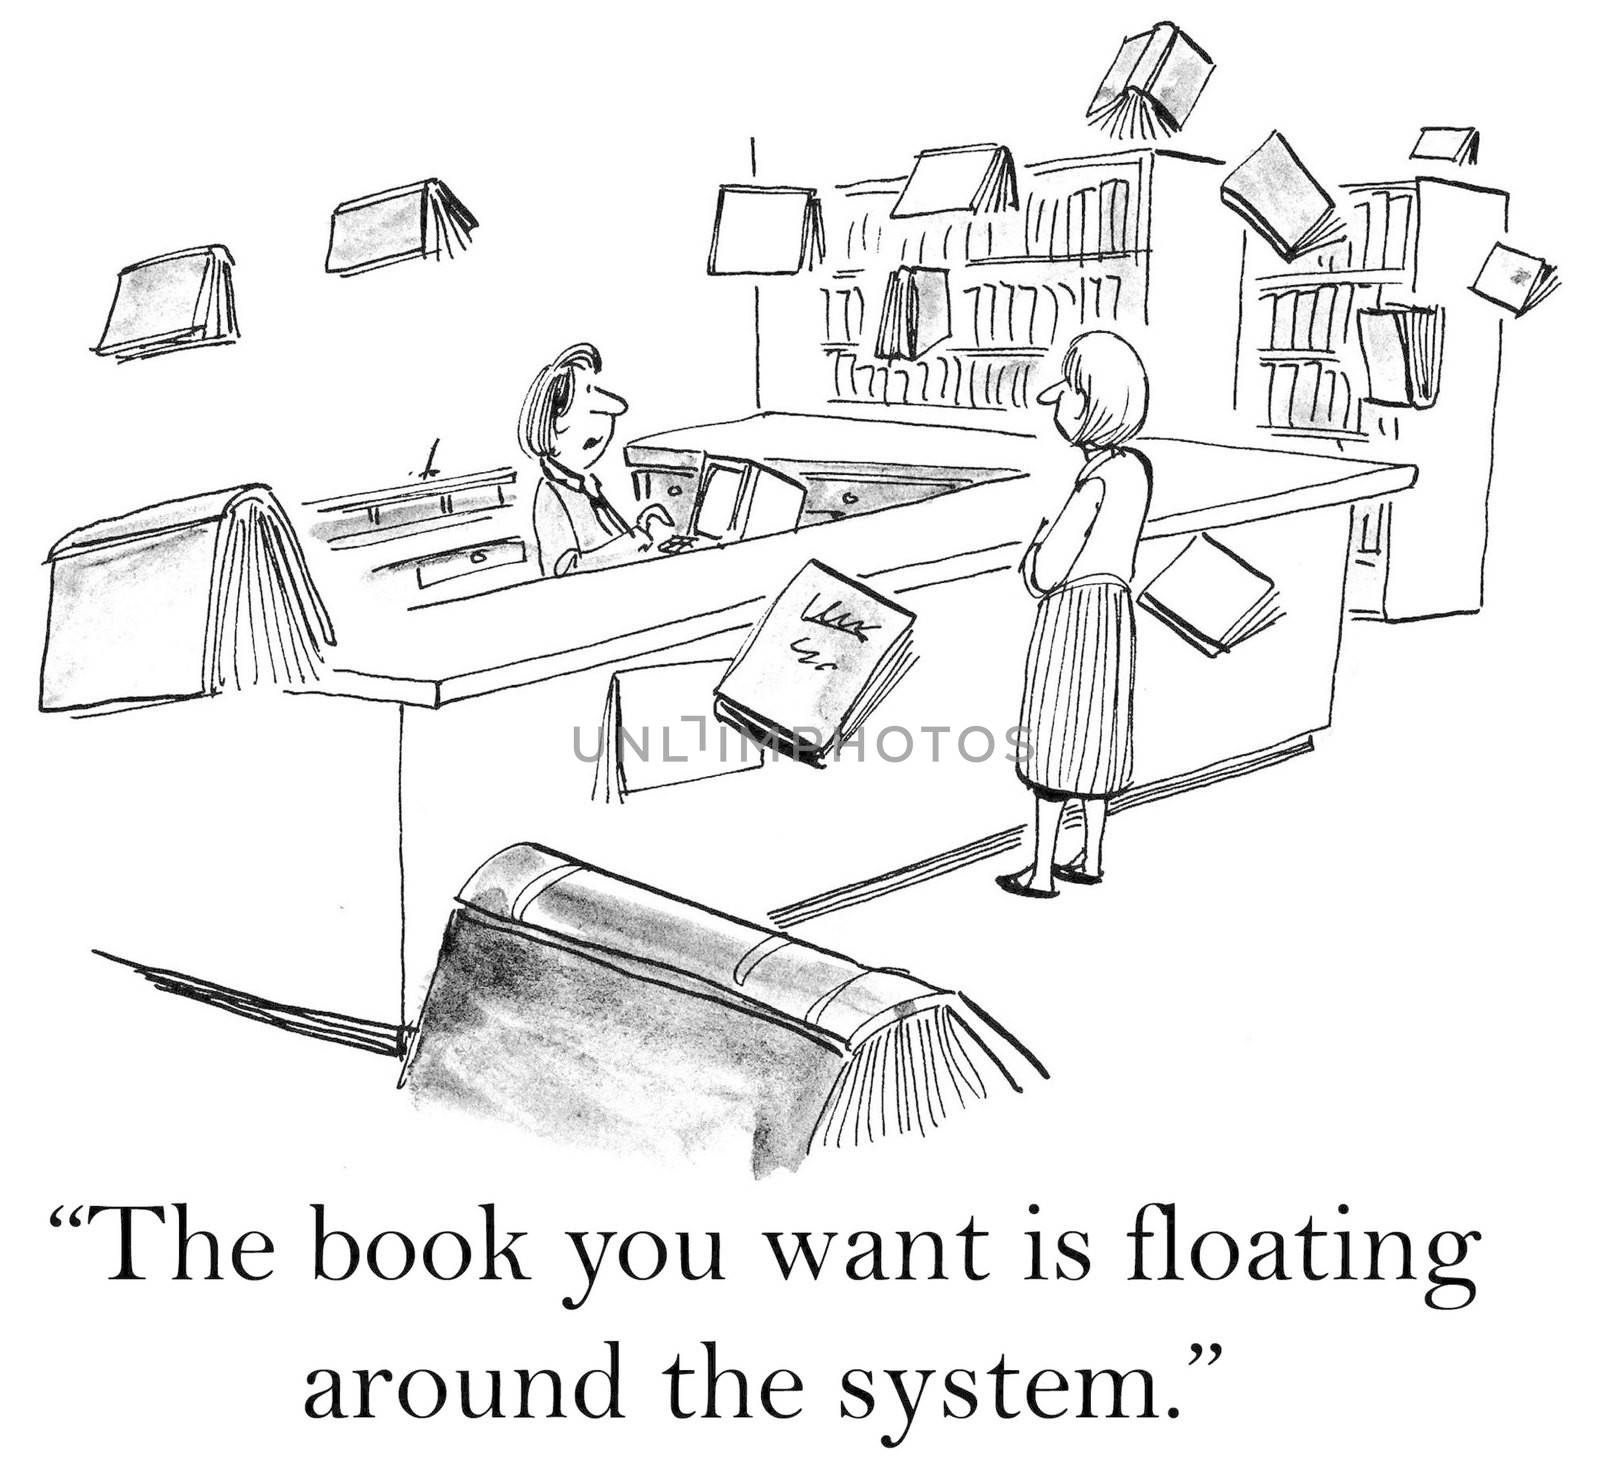 "The book you want is floating around the system."